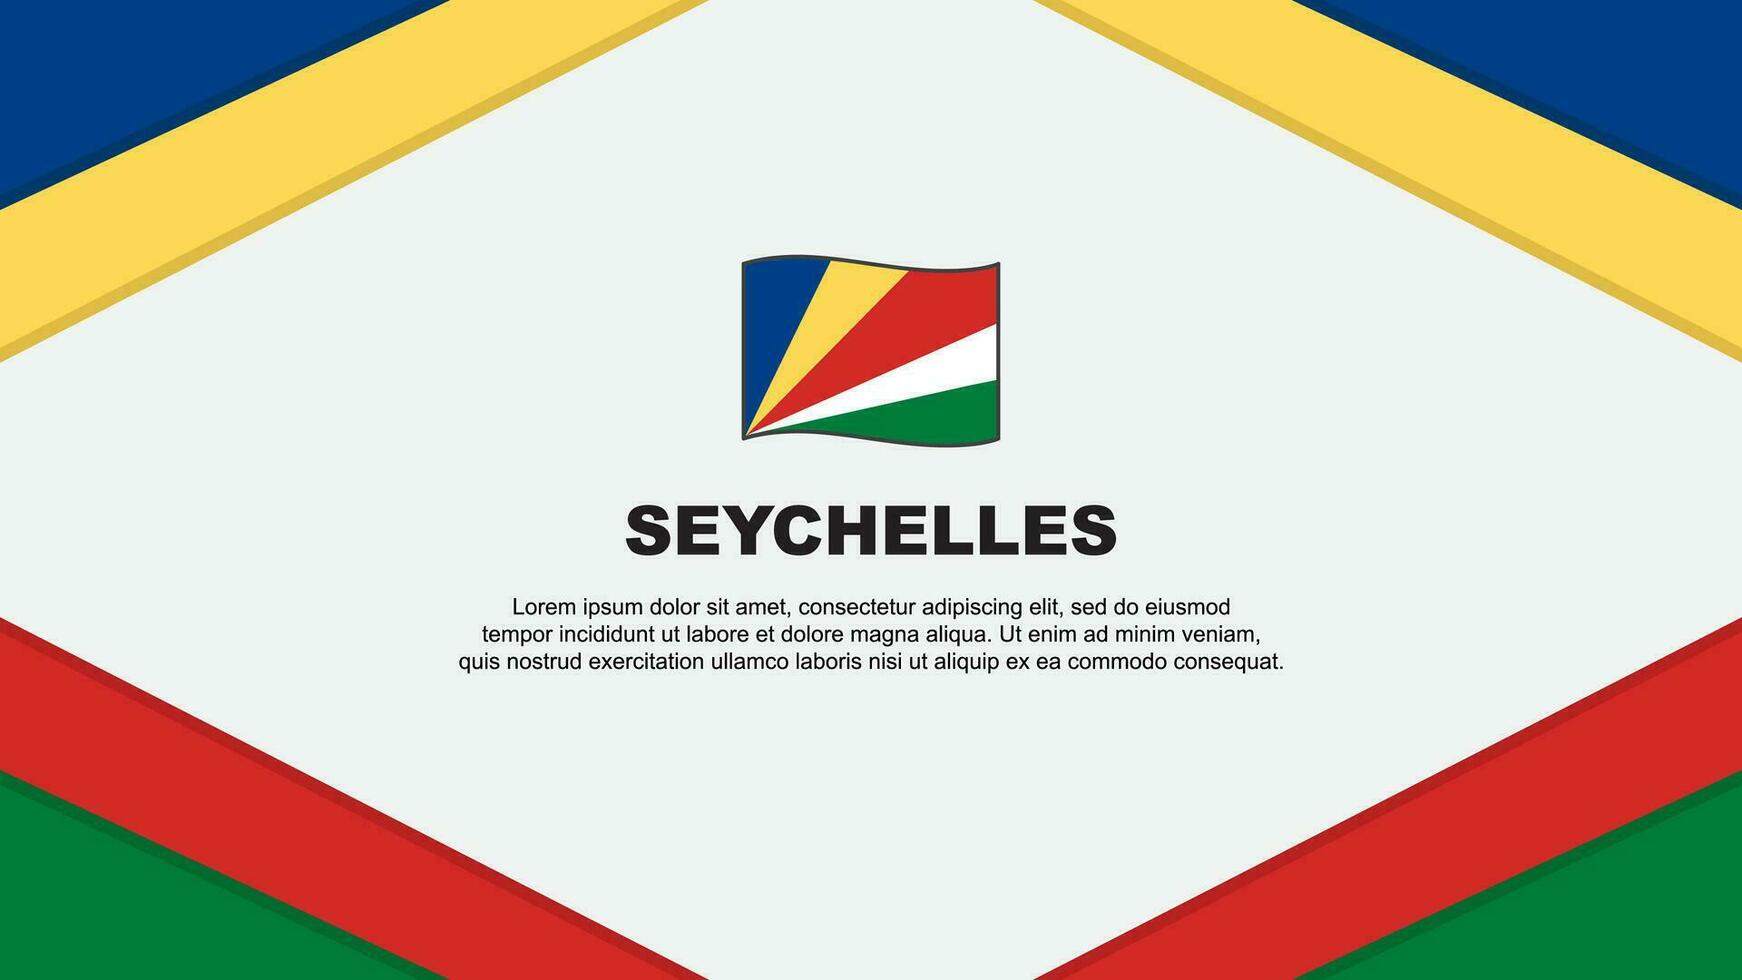 Seychelles Flag Abstract Background Design Template. Seychelles Independence Day Banner Cartoon Vector Illustration. Seychelles Template